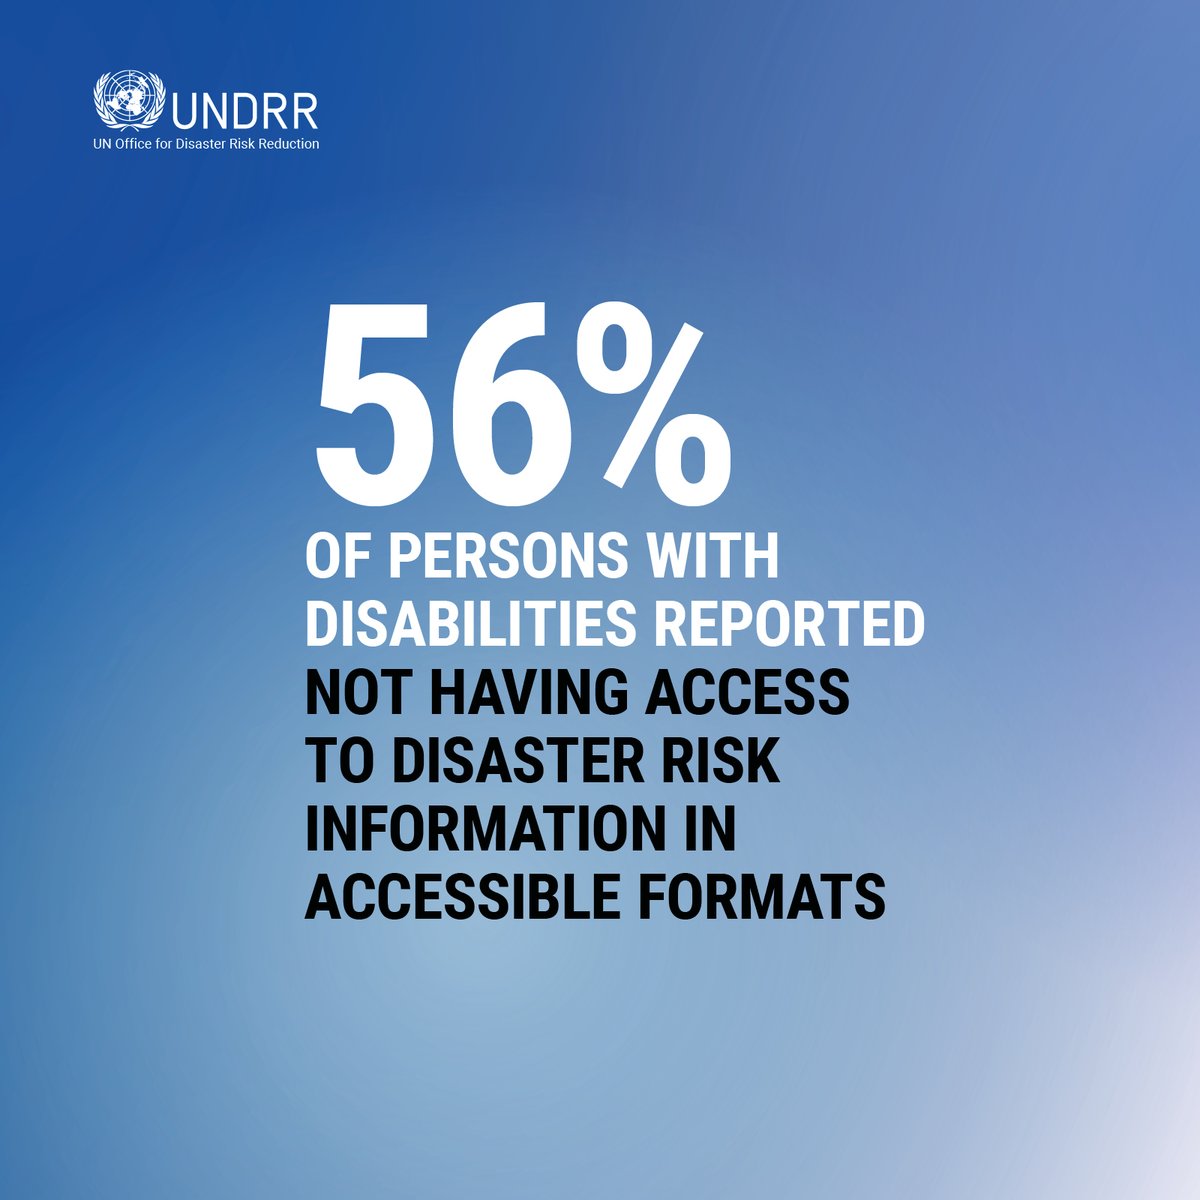 👩‍🦽Governments and DRR stakeholders must take urgent measures to ensure equity between persons with and without disabilities in all efforts to reduce and prevent disaster risk. 2023 Global Survey on Persons with Disabilities and Disasters 👉 ow.ly/AMwi50Q6TZz